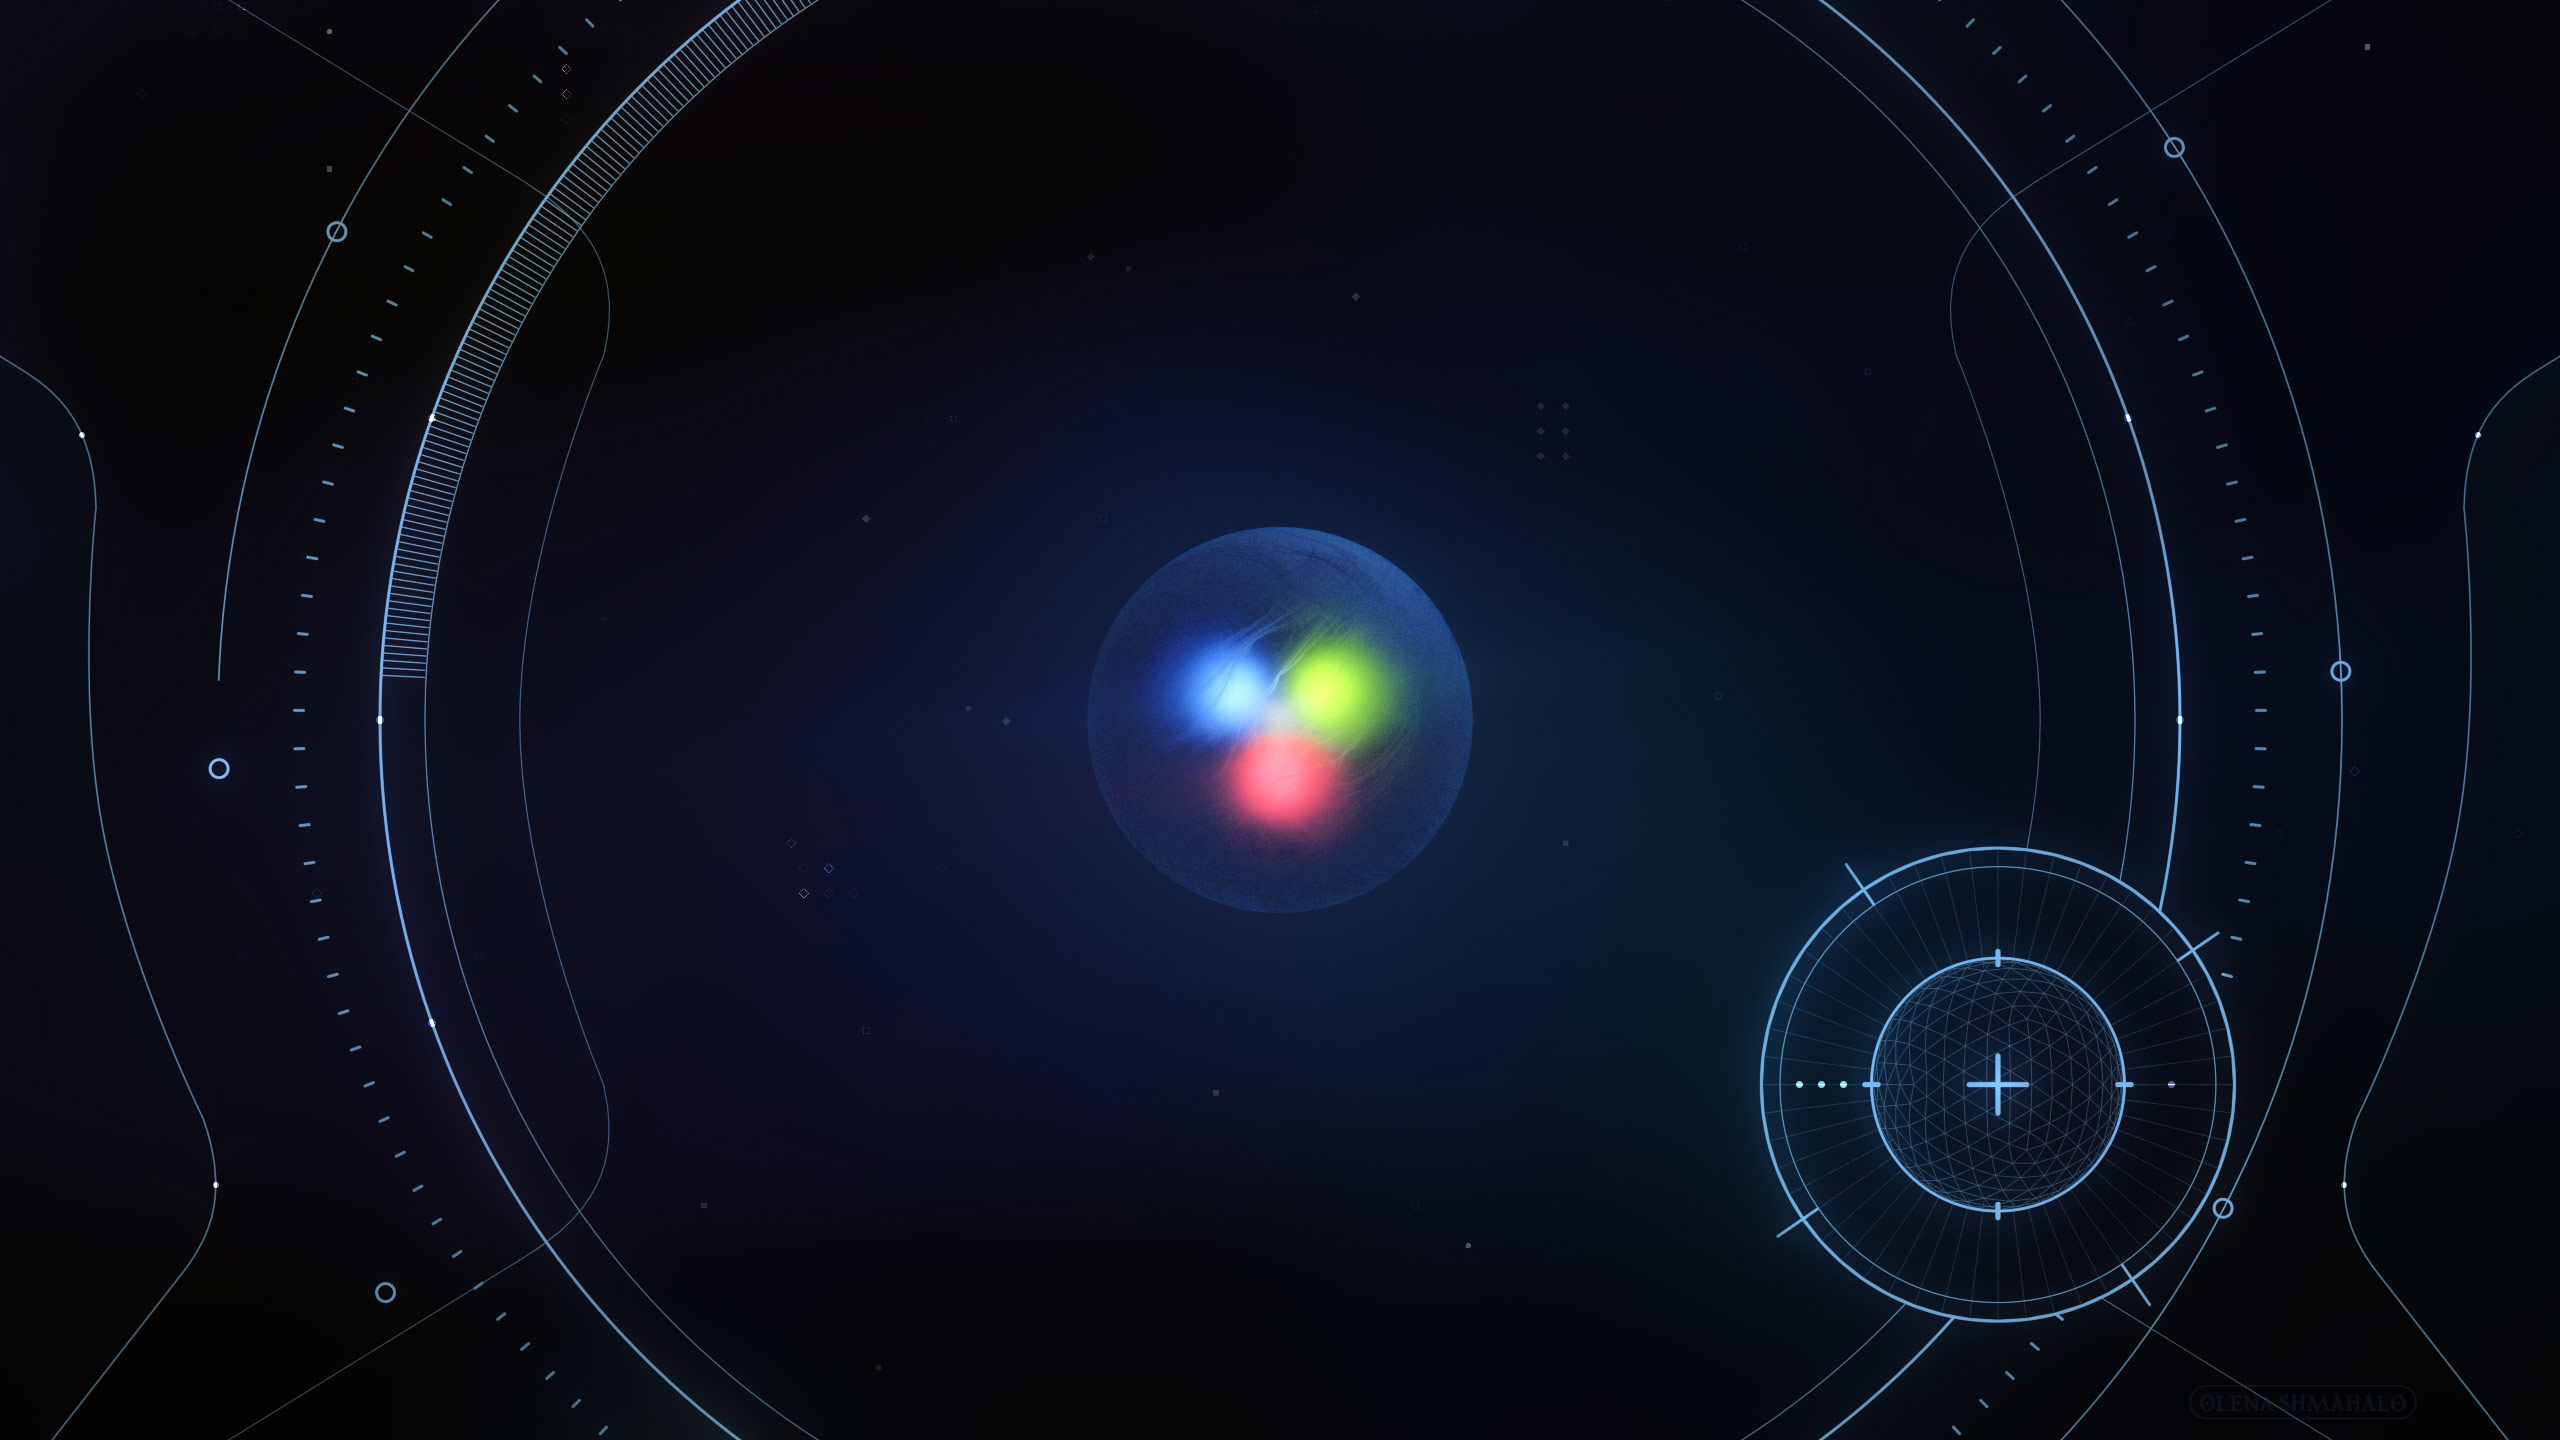 3D art: A proton particle on a dark background with FUI.